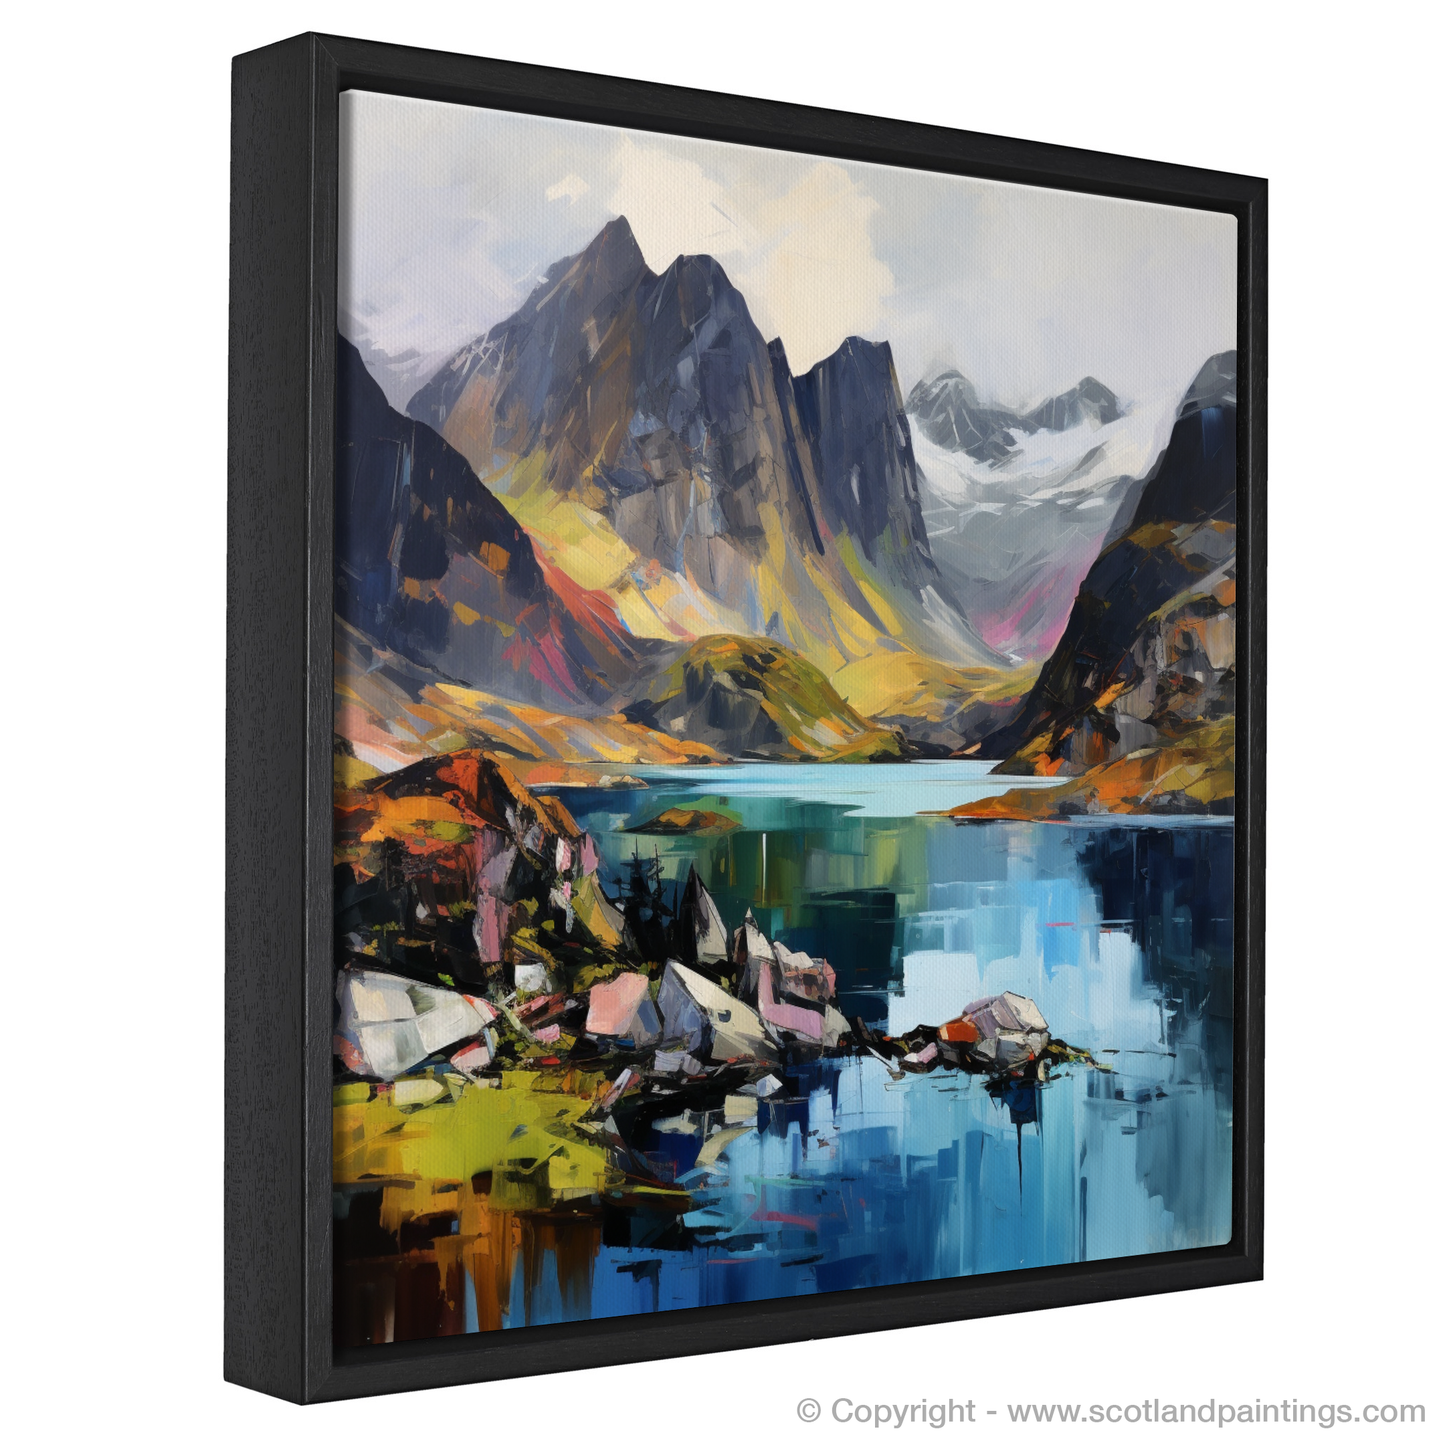 Painting and Art Print of Loch Coruisk, Isle of Skye entitled "Loch Coruisk: A Symphony of Nature and Expressionism".